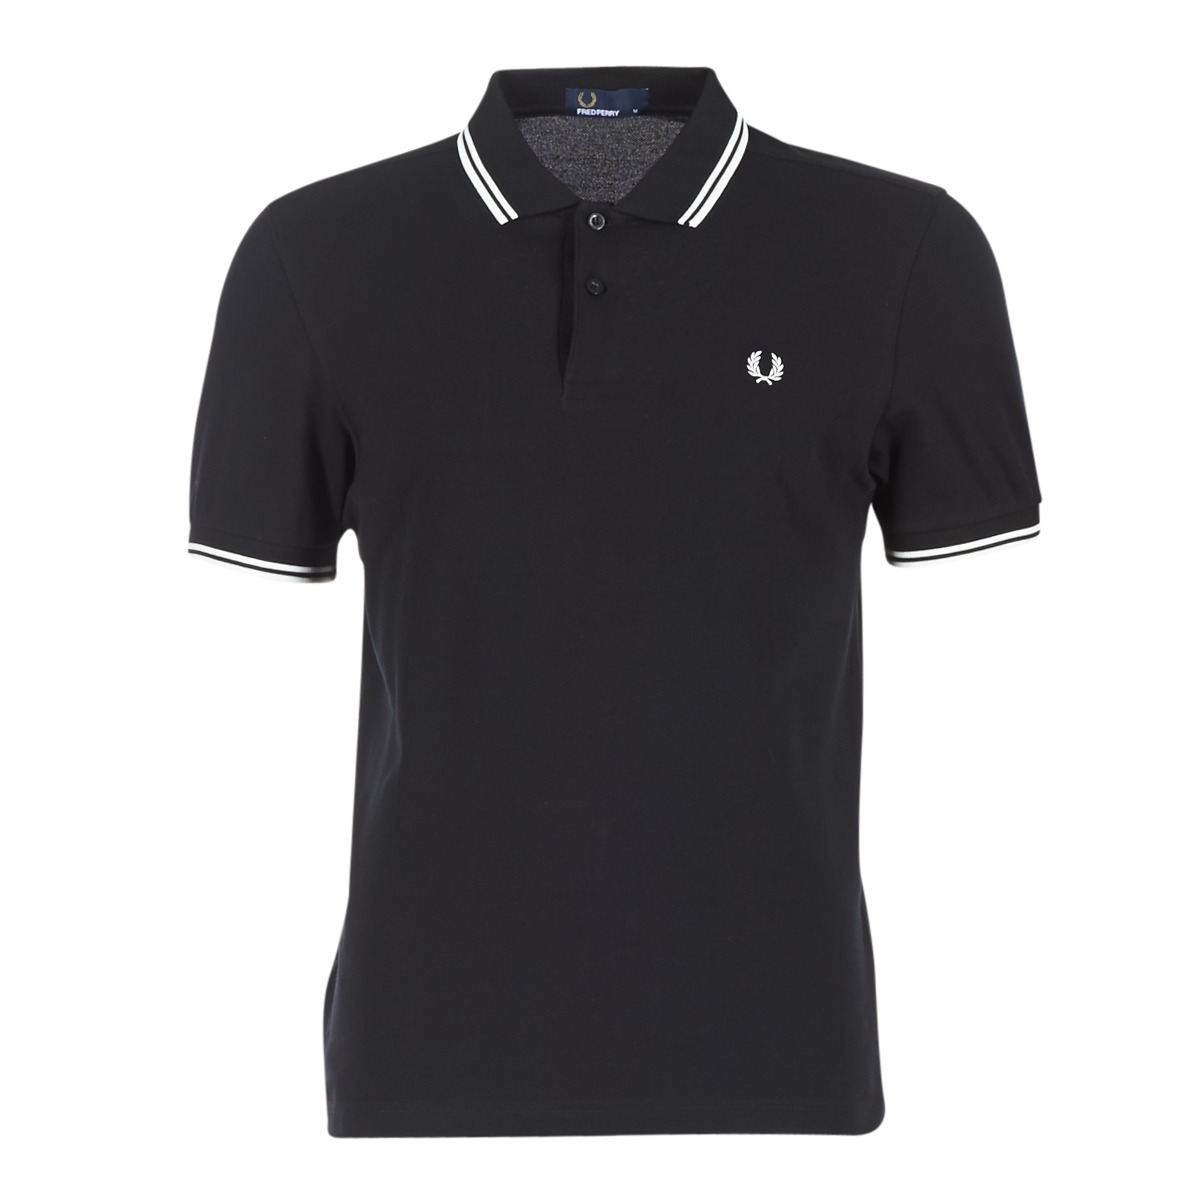 celos Abuso Dictadura Fred Perry SLIM FIT TWIN TIPPED Black / White - Free delivery | Spartoo NET  ! - Clothing short-sleeved polo shirts Men USD/$98.00